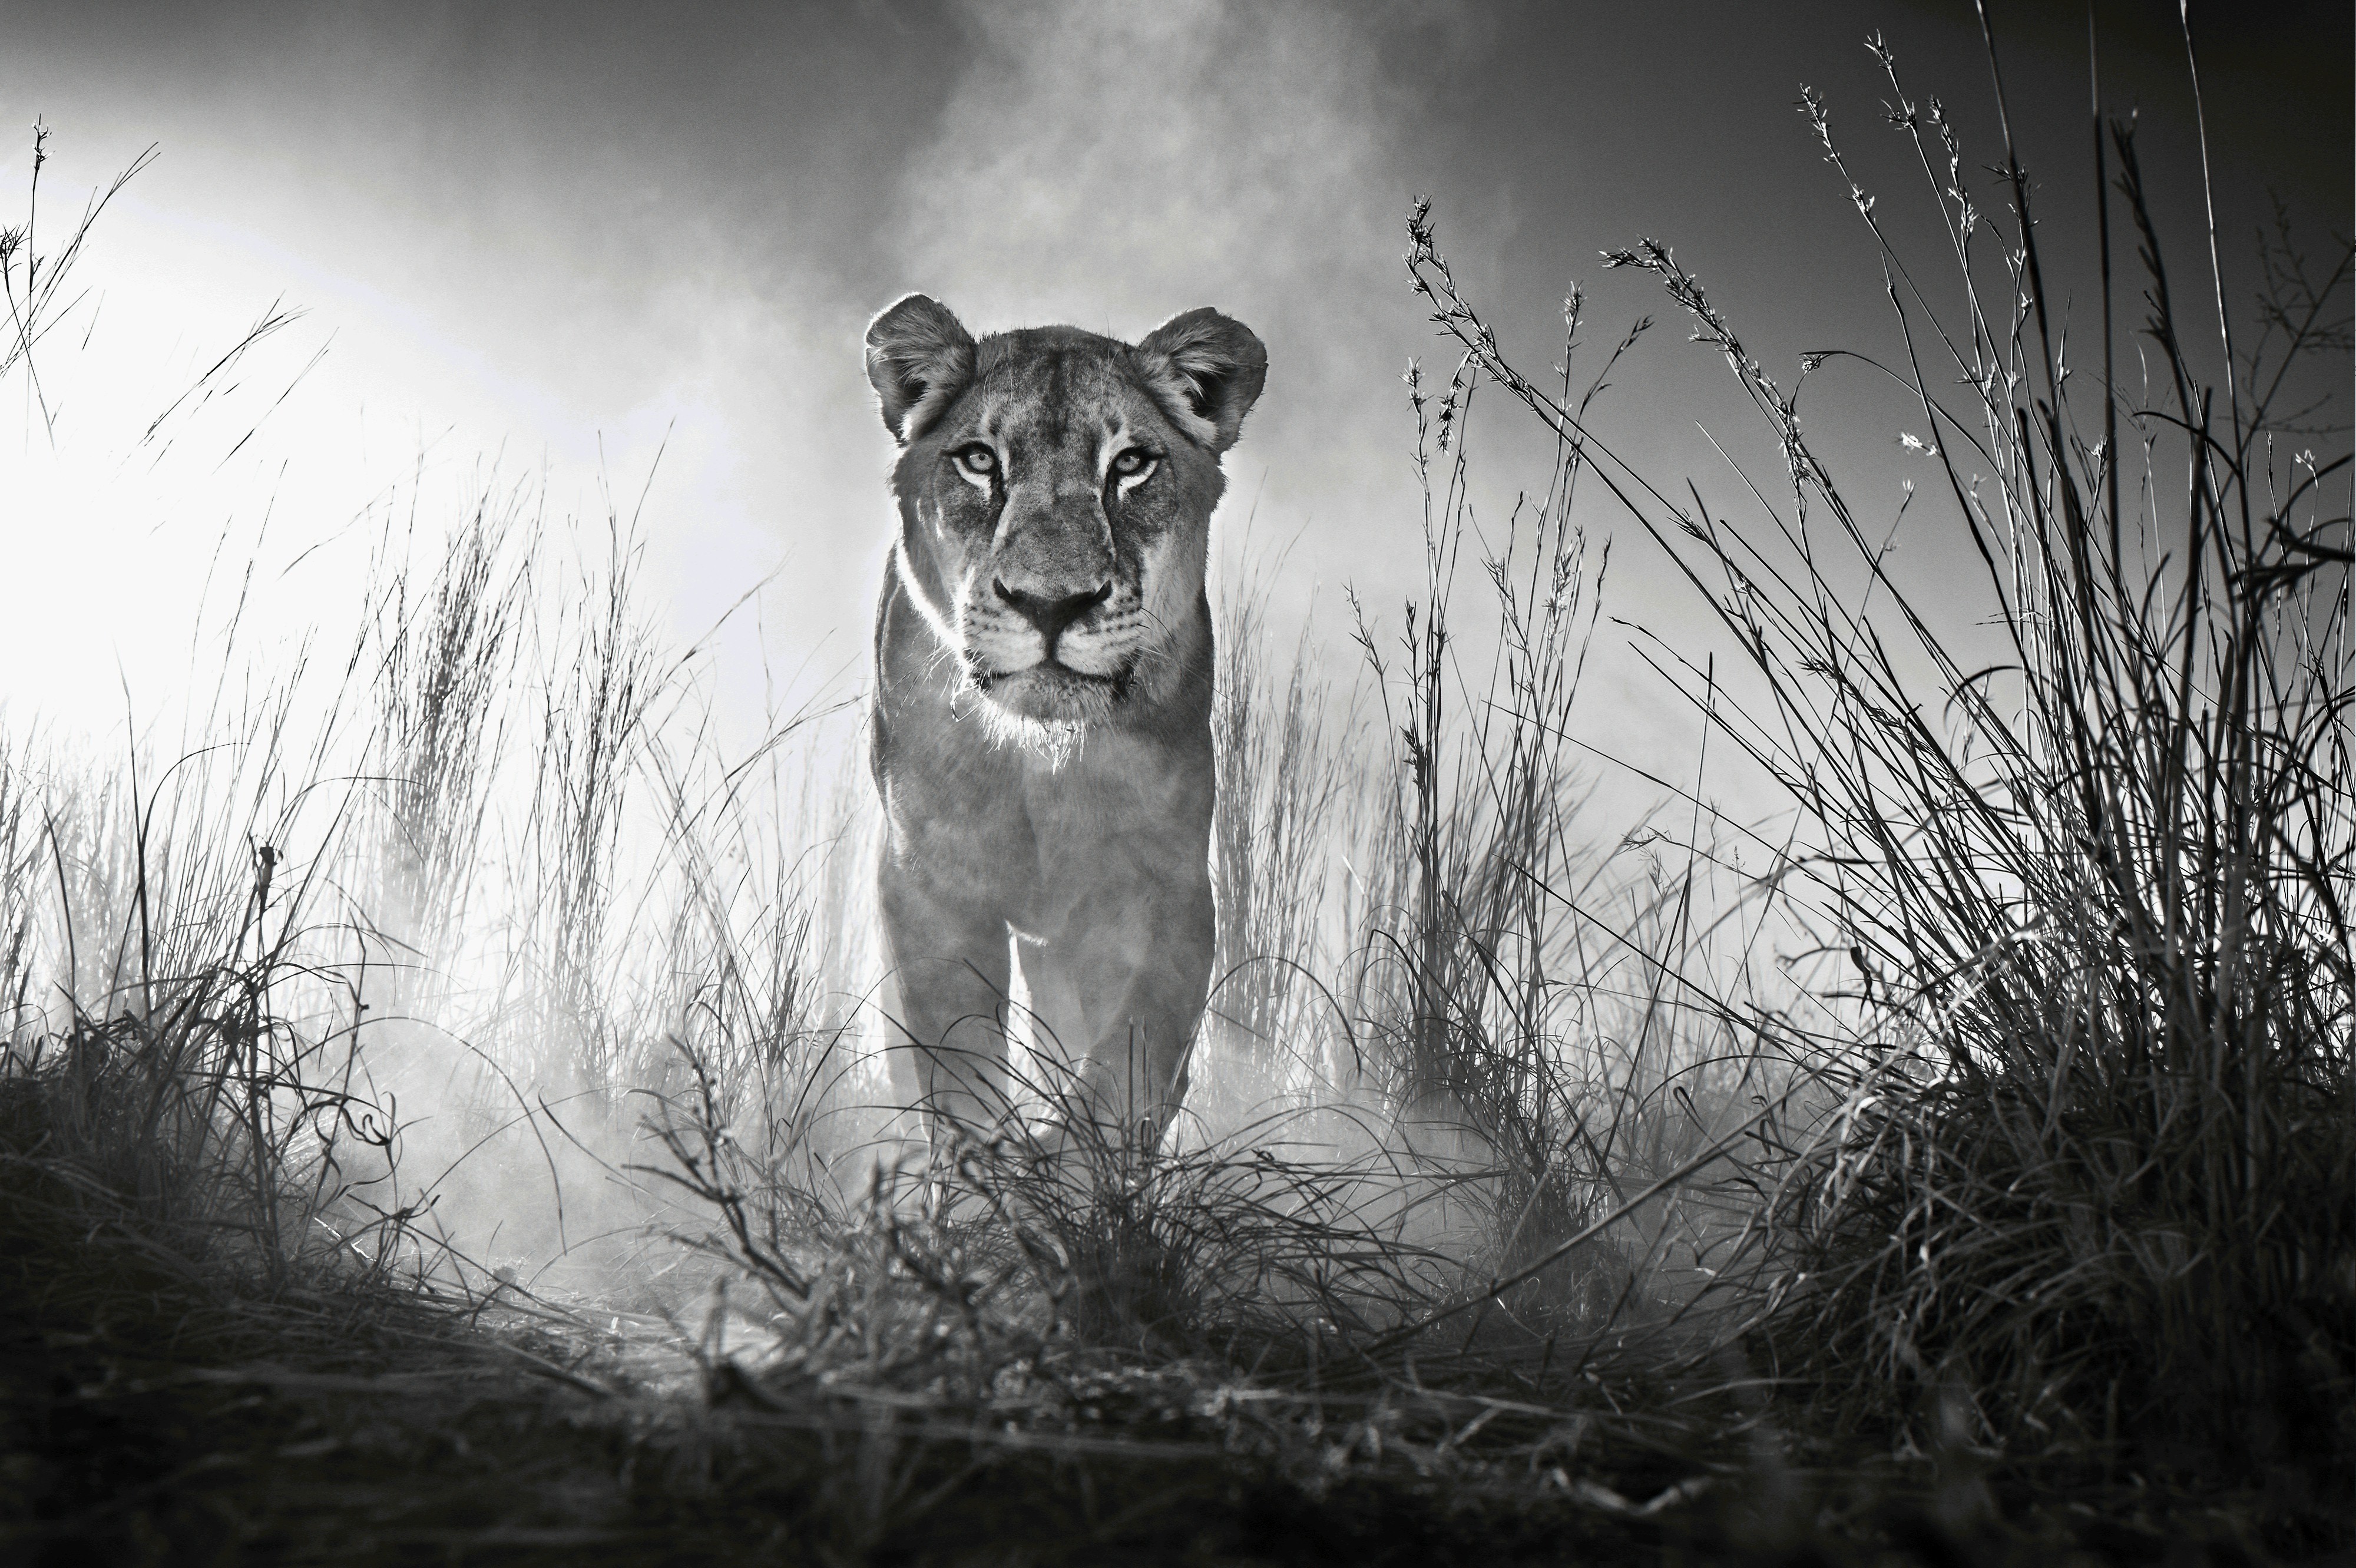 Wallpapers lion animals black and white on the desktop